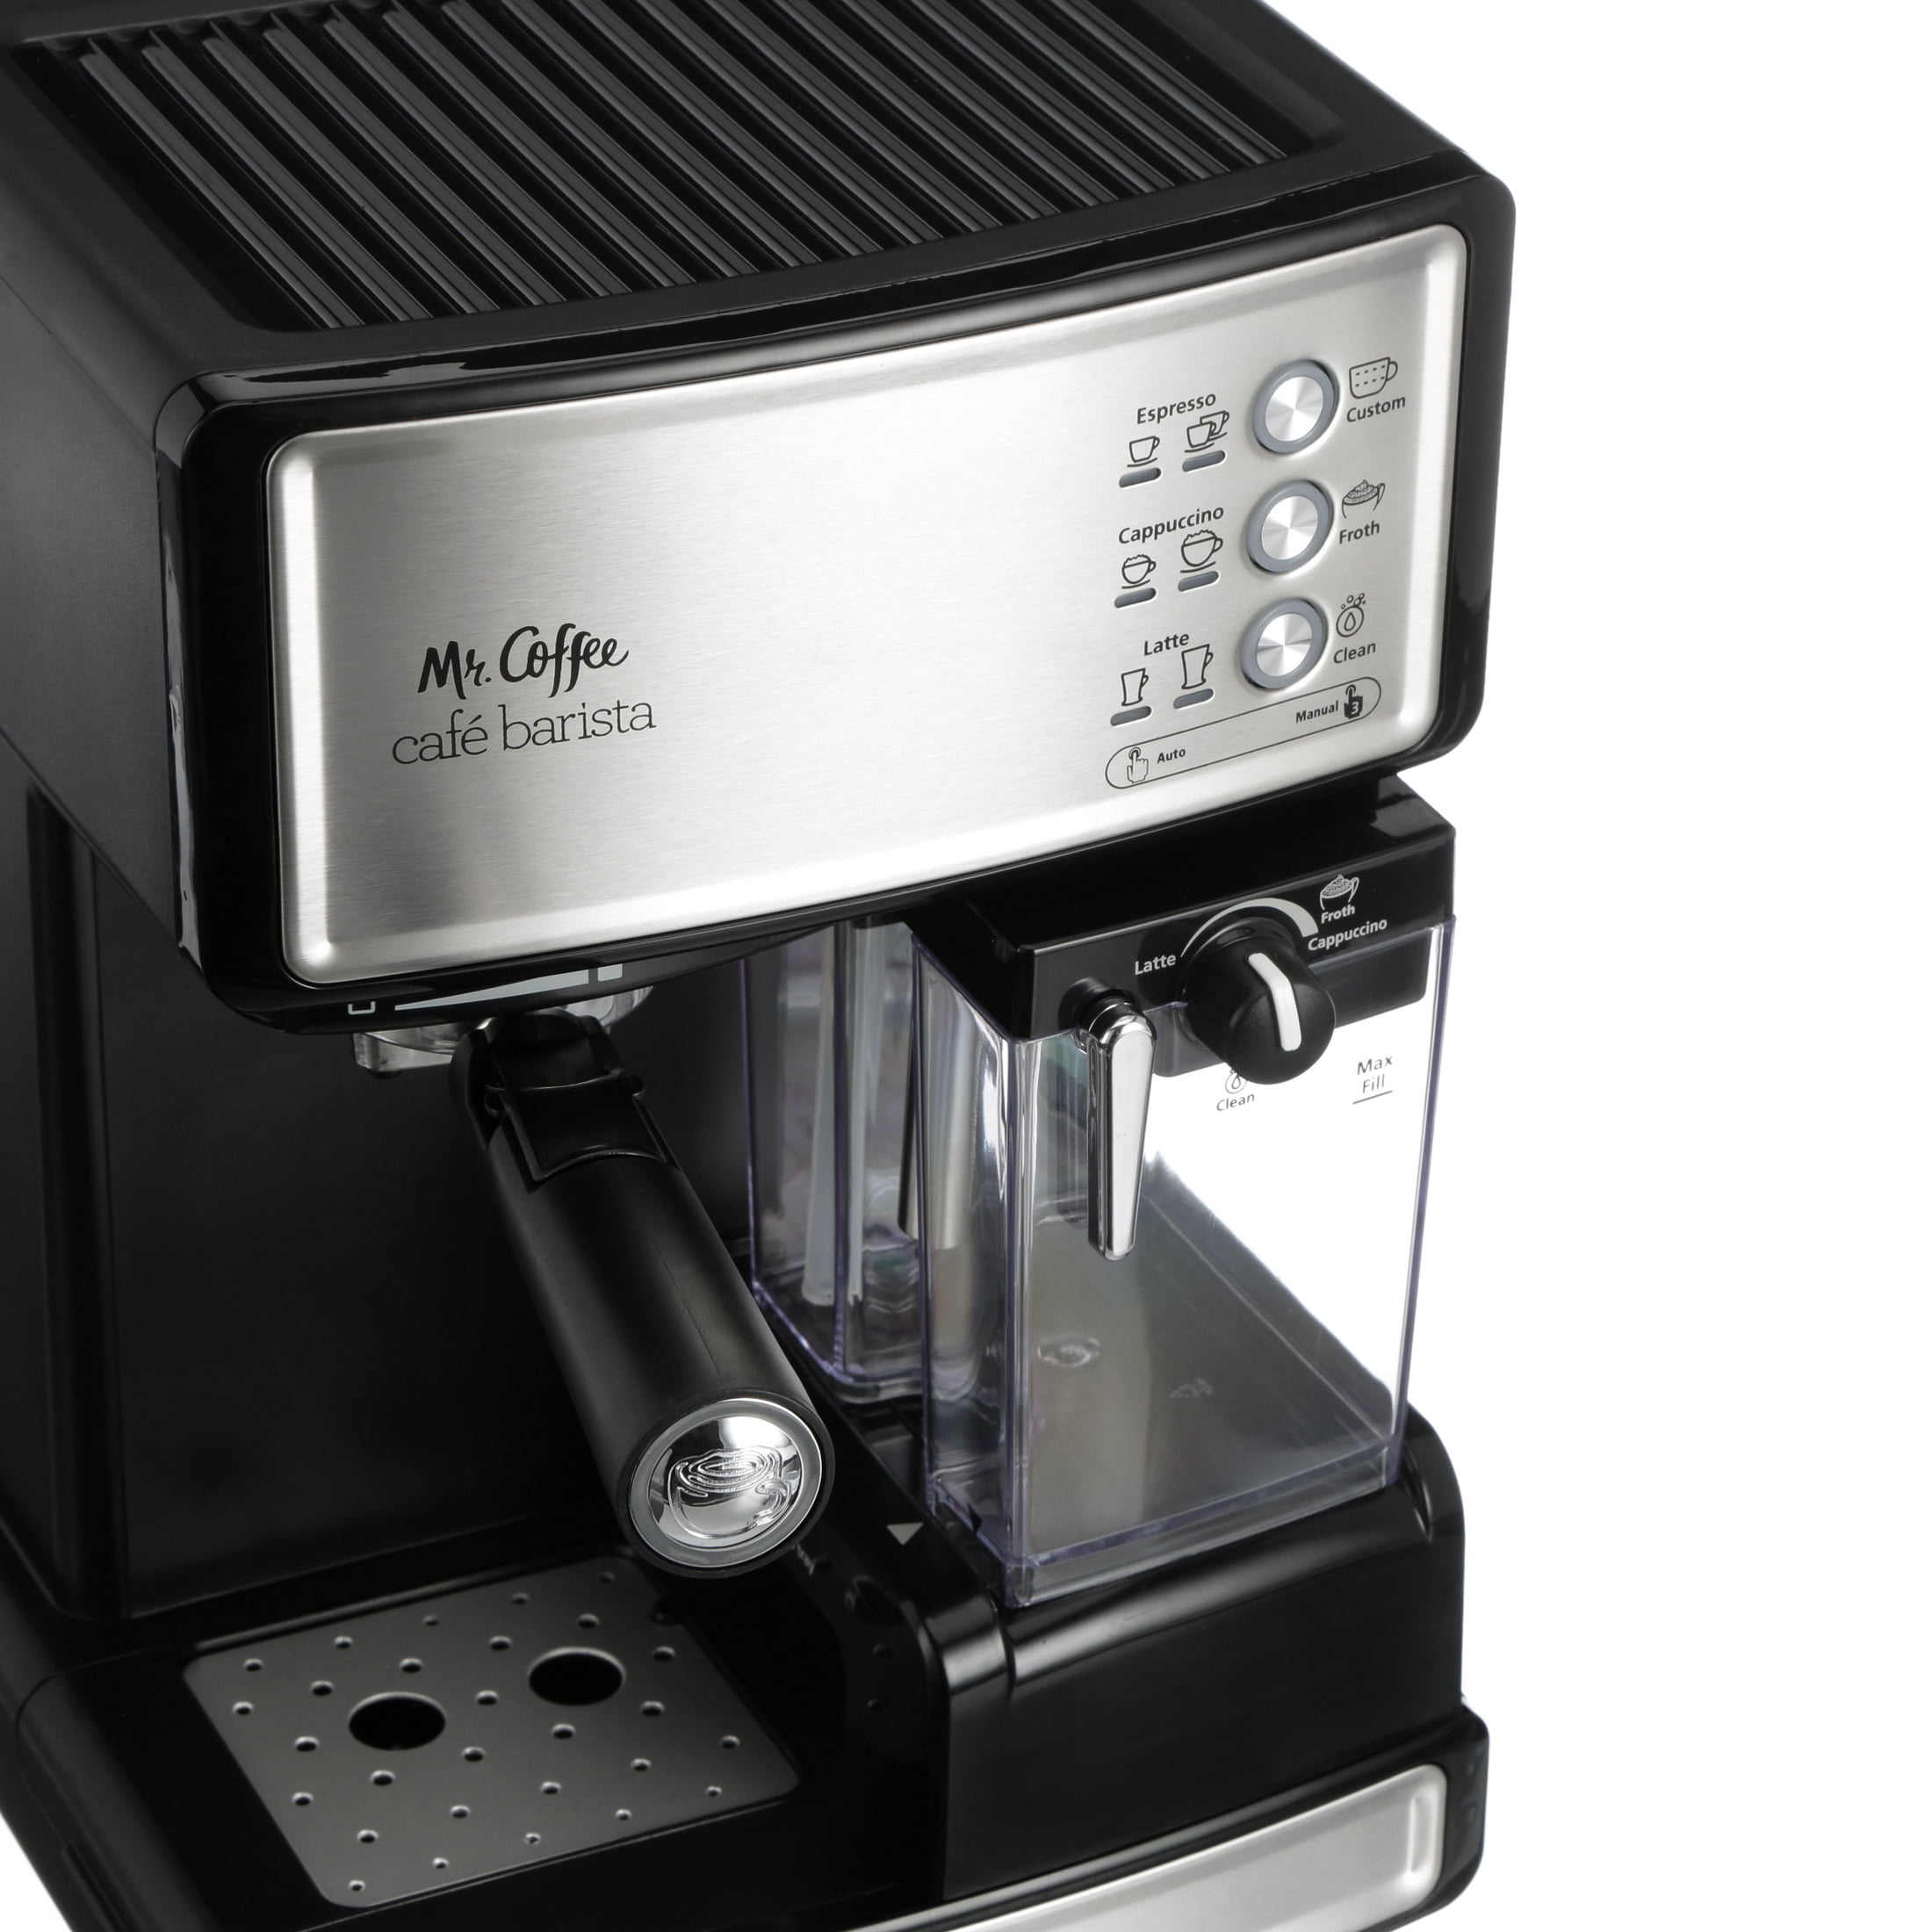 Mr. Coffee Cafe Barista Review: Should You Buy? (2023) 